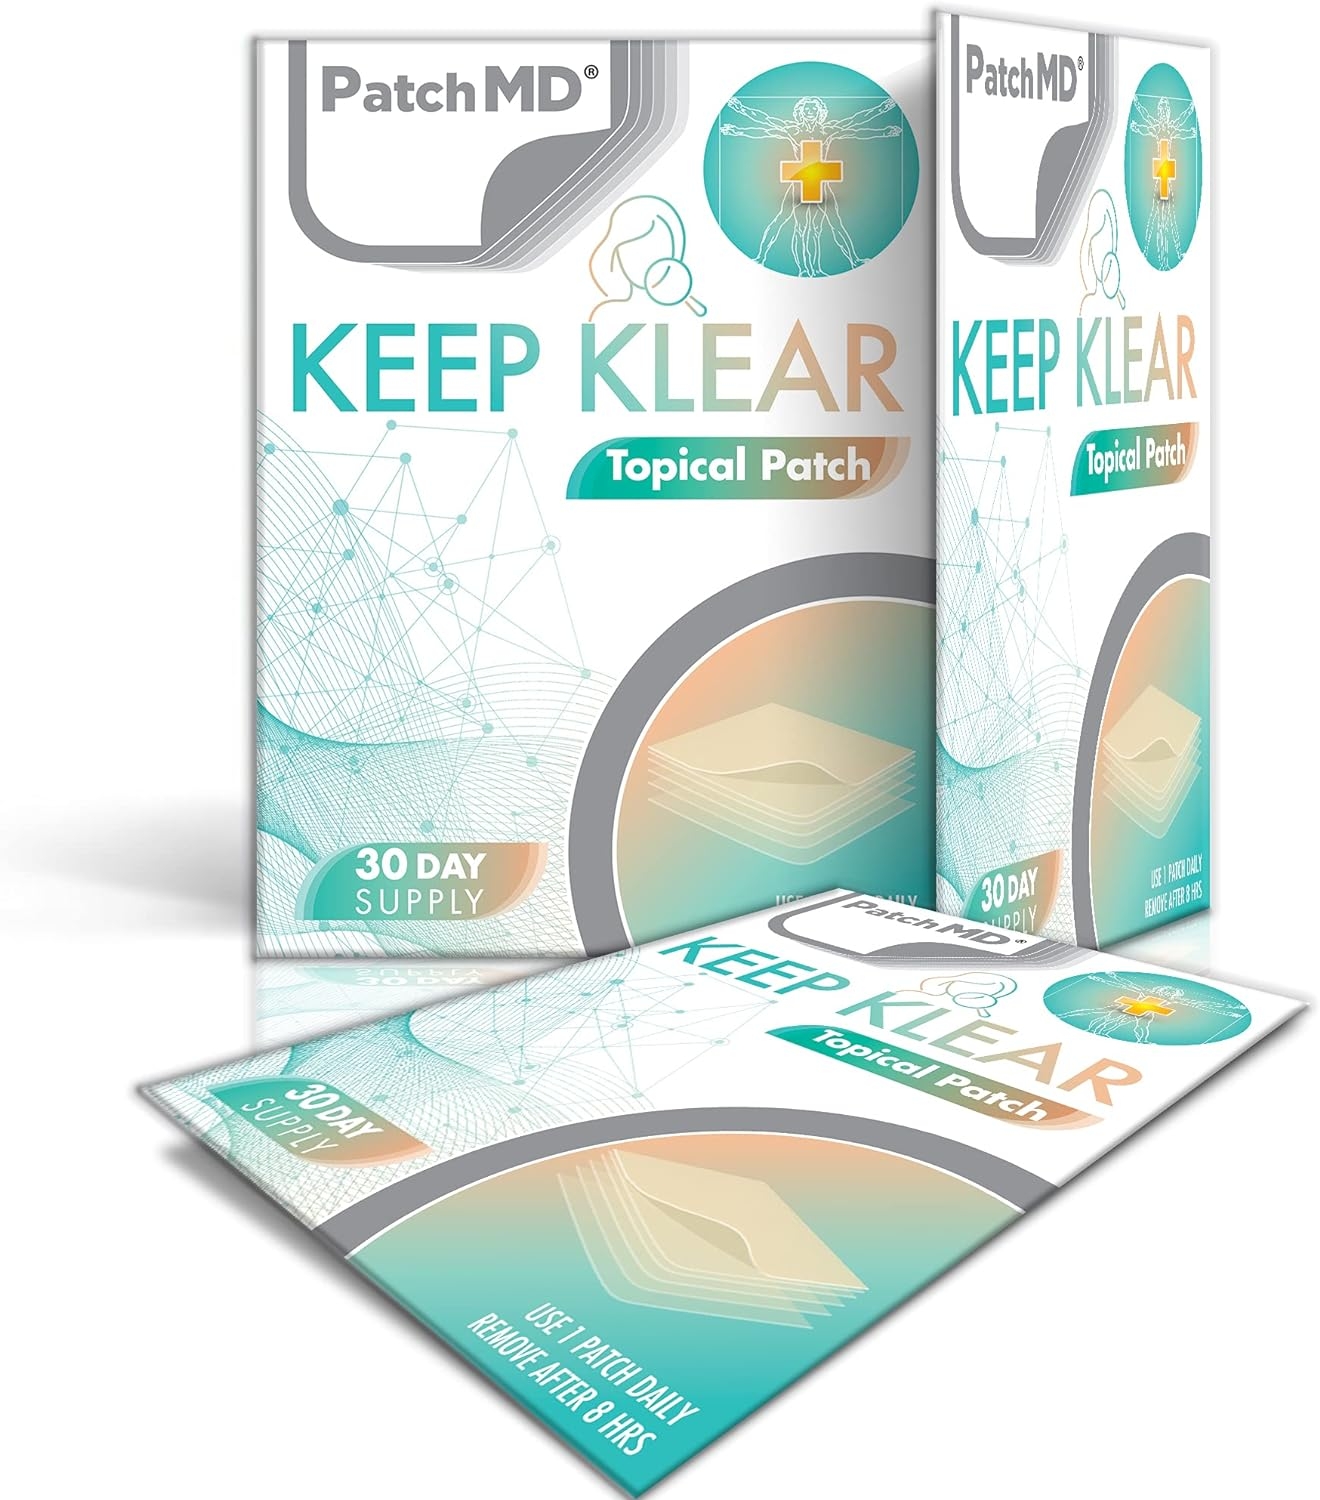 PatchMD - Keep Klear Acne Prevention Patch, 30 Day Supply